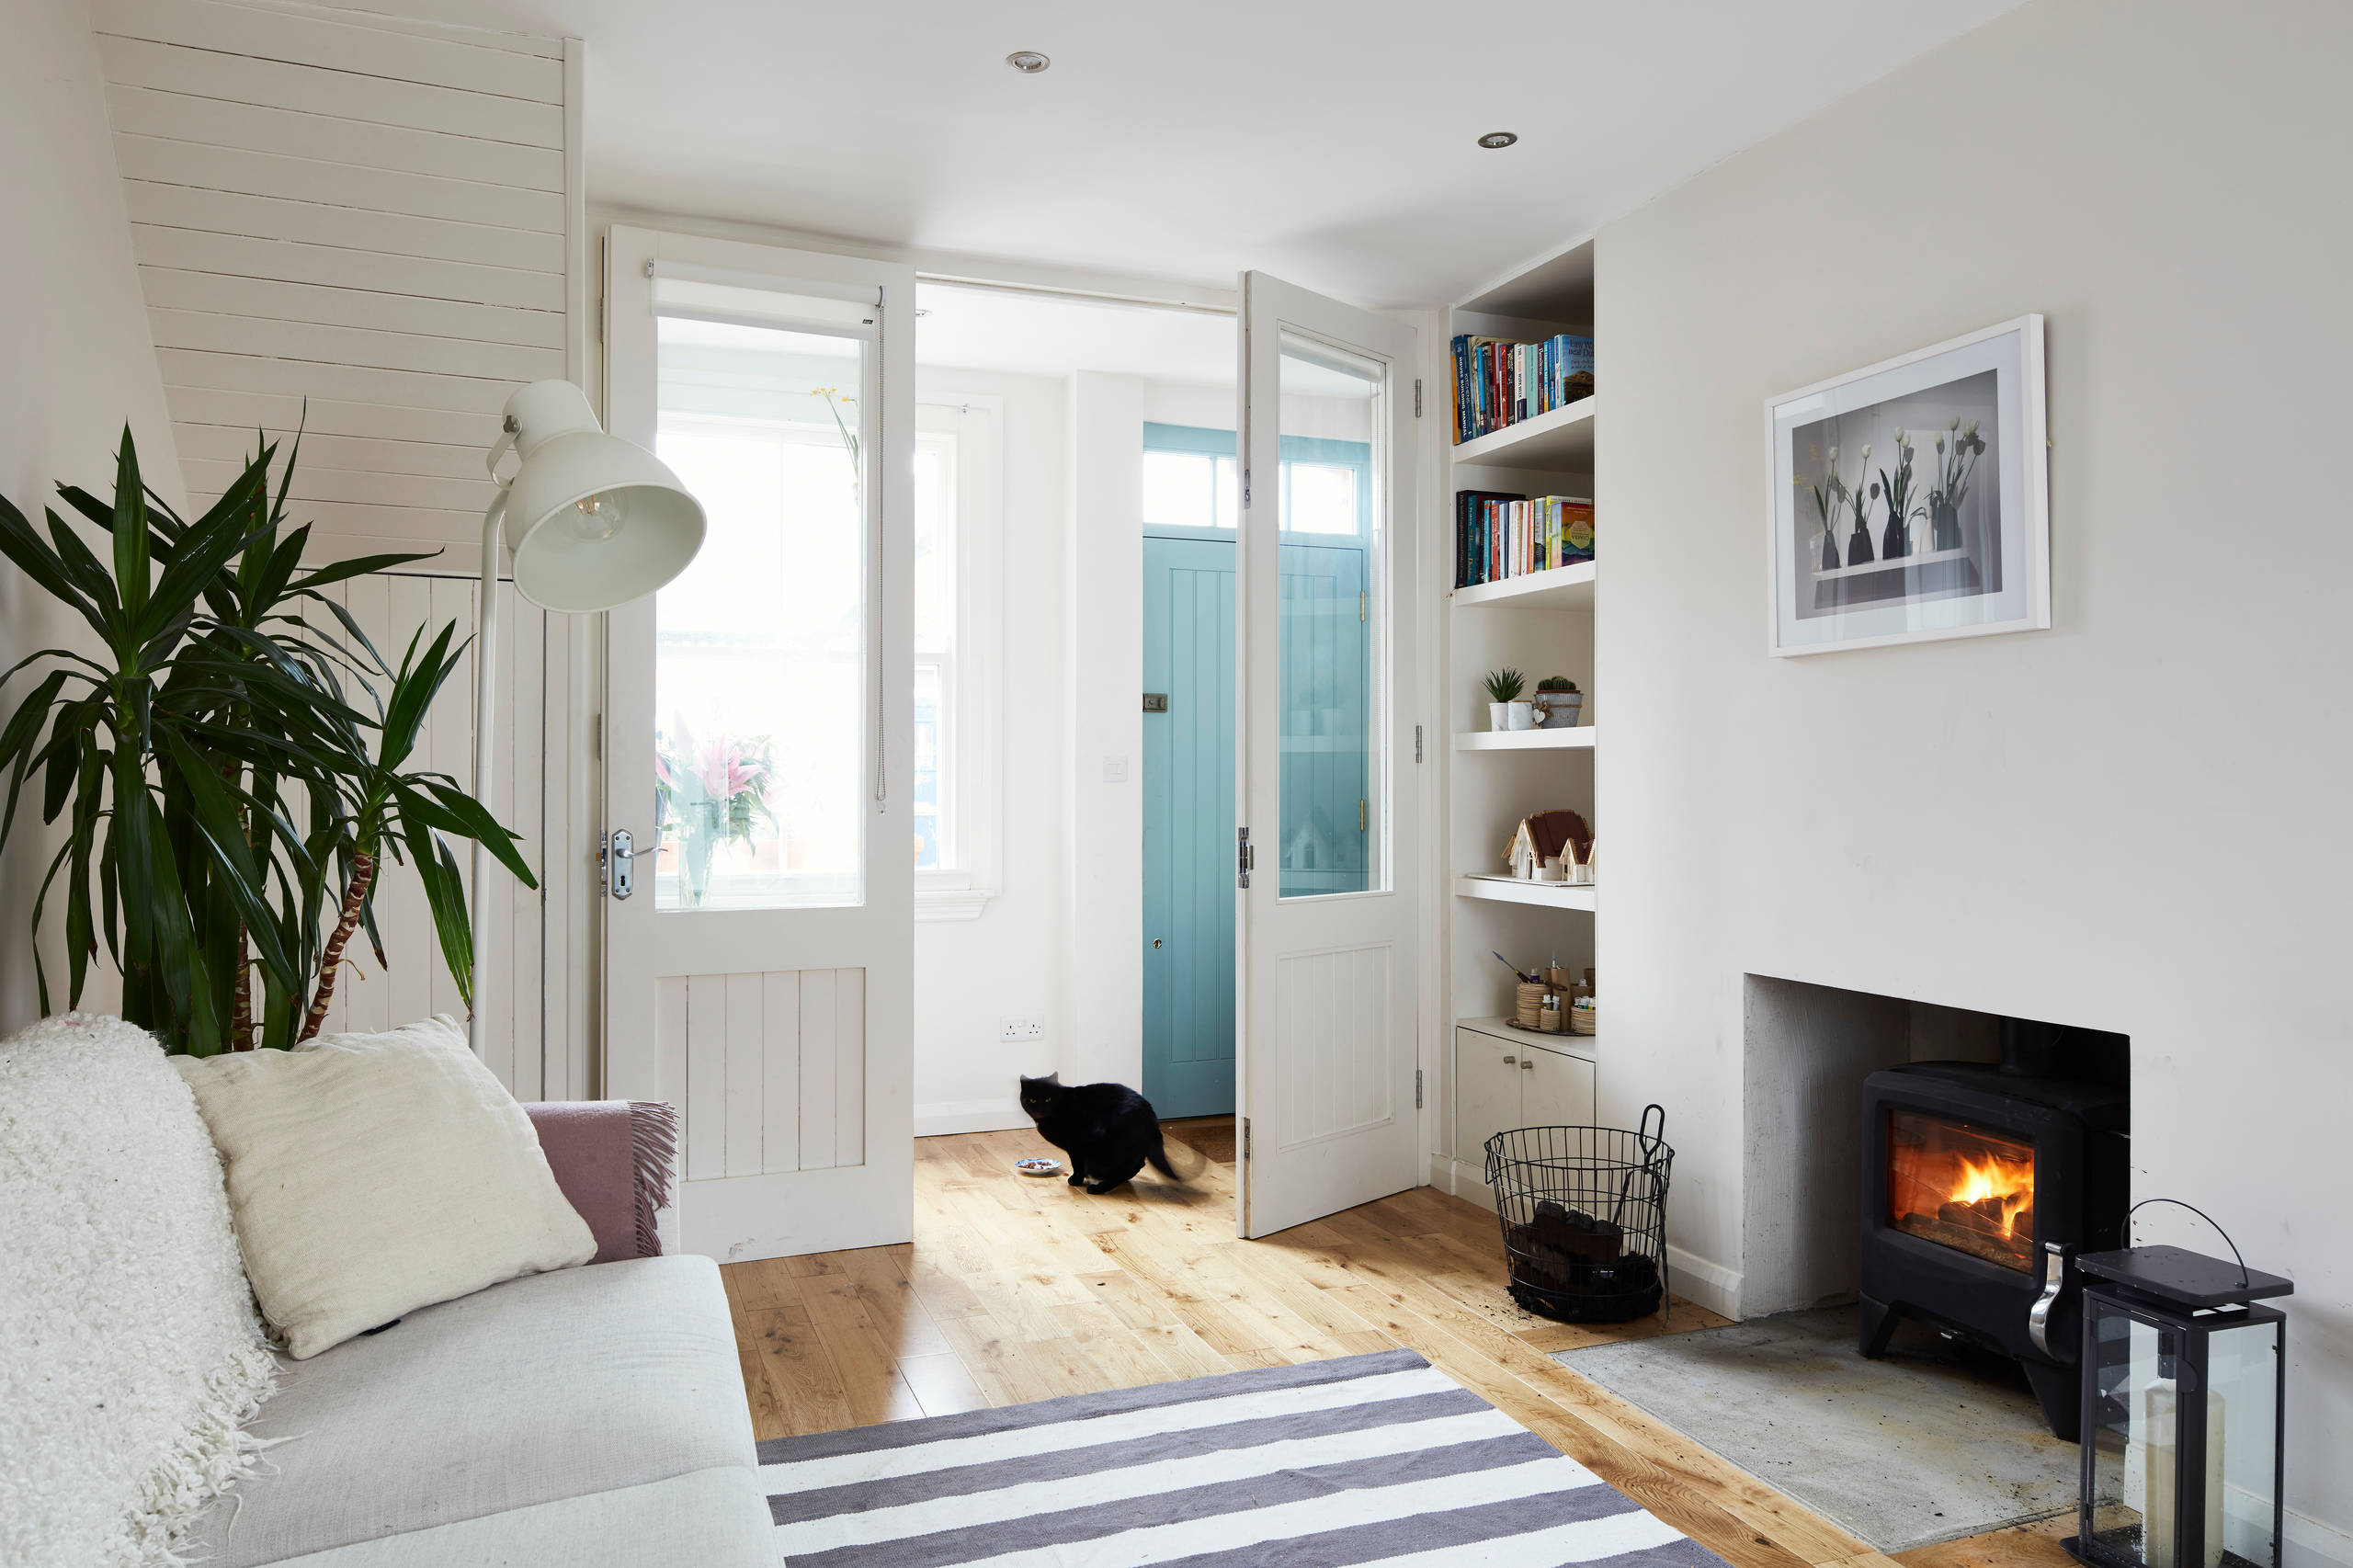 75 Beautiful Scandinavian Living Room With A Wood Stove Pictures Ideas January 2021 Houzz